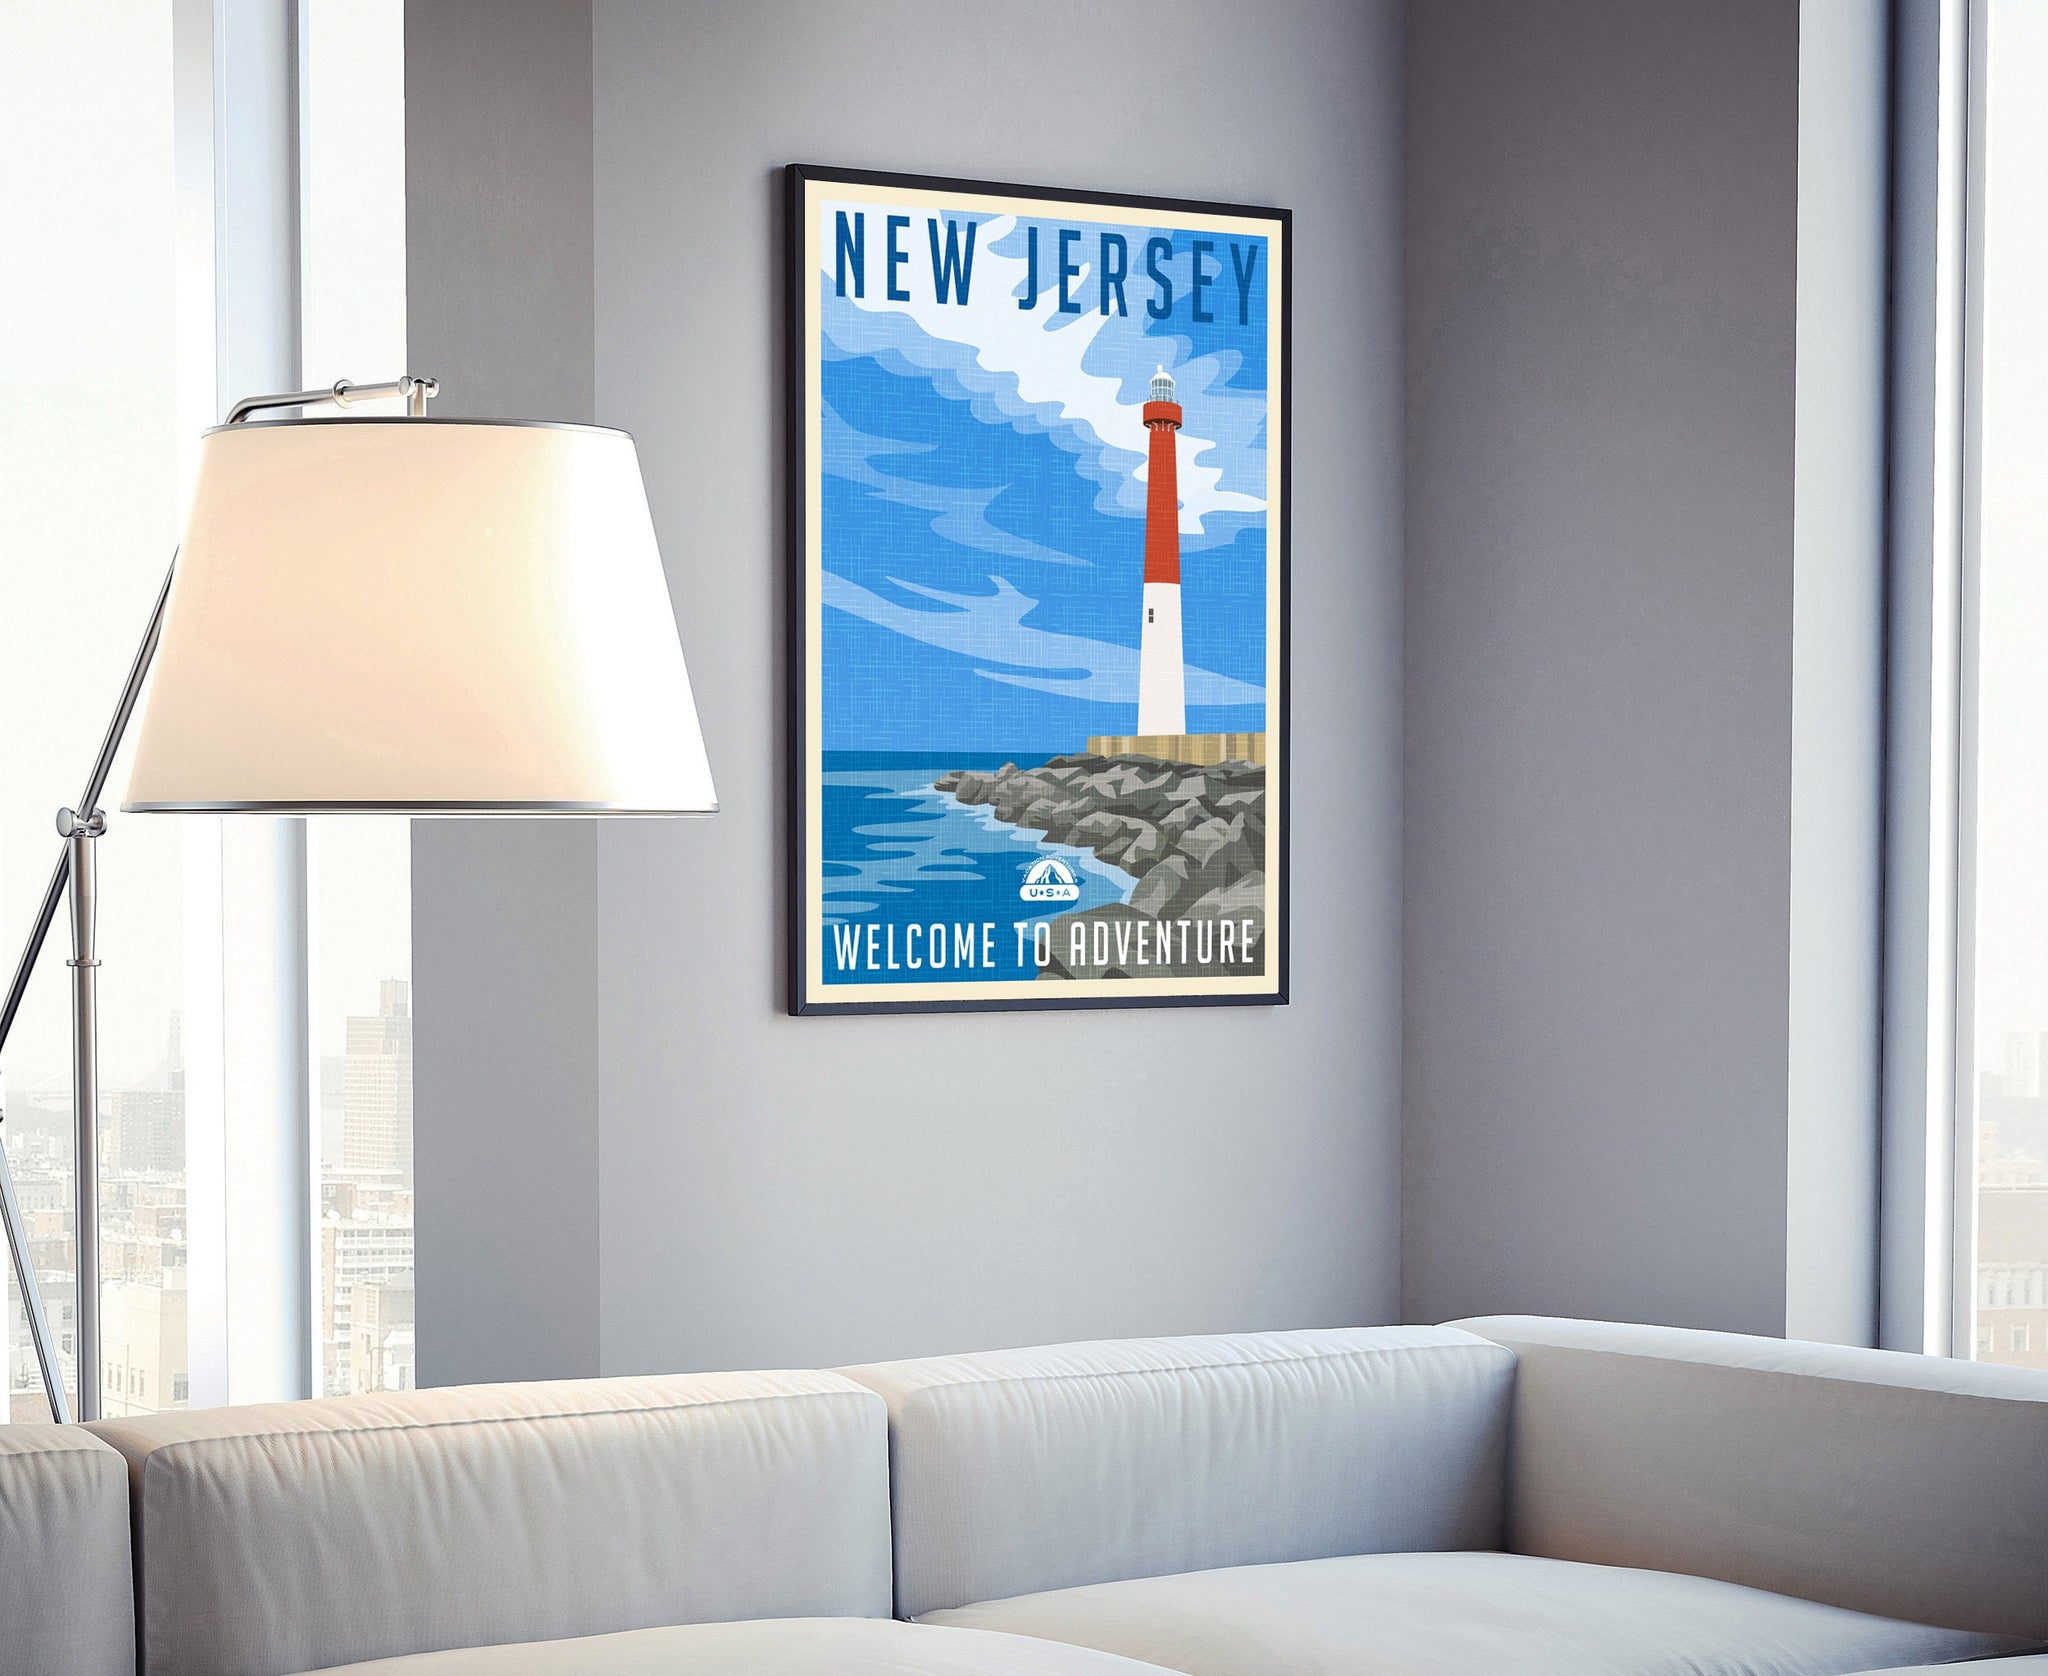 New Jersey Vintage Rustic Poster Print, Retro Style Travel Poster